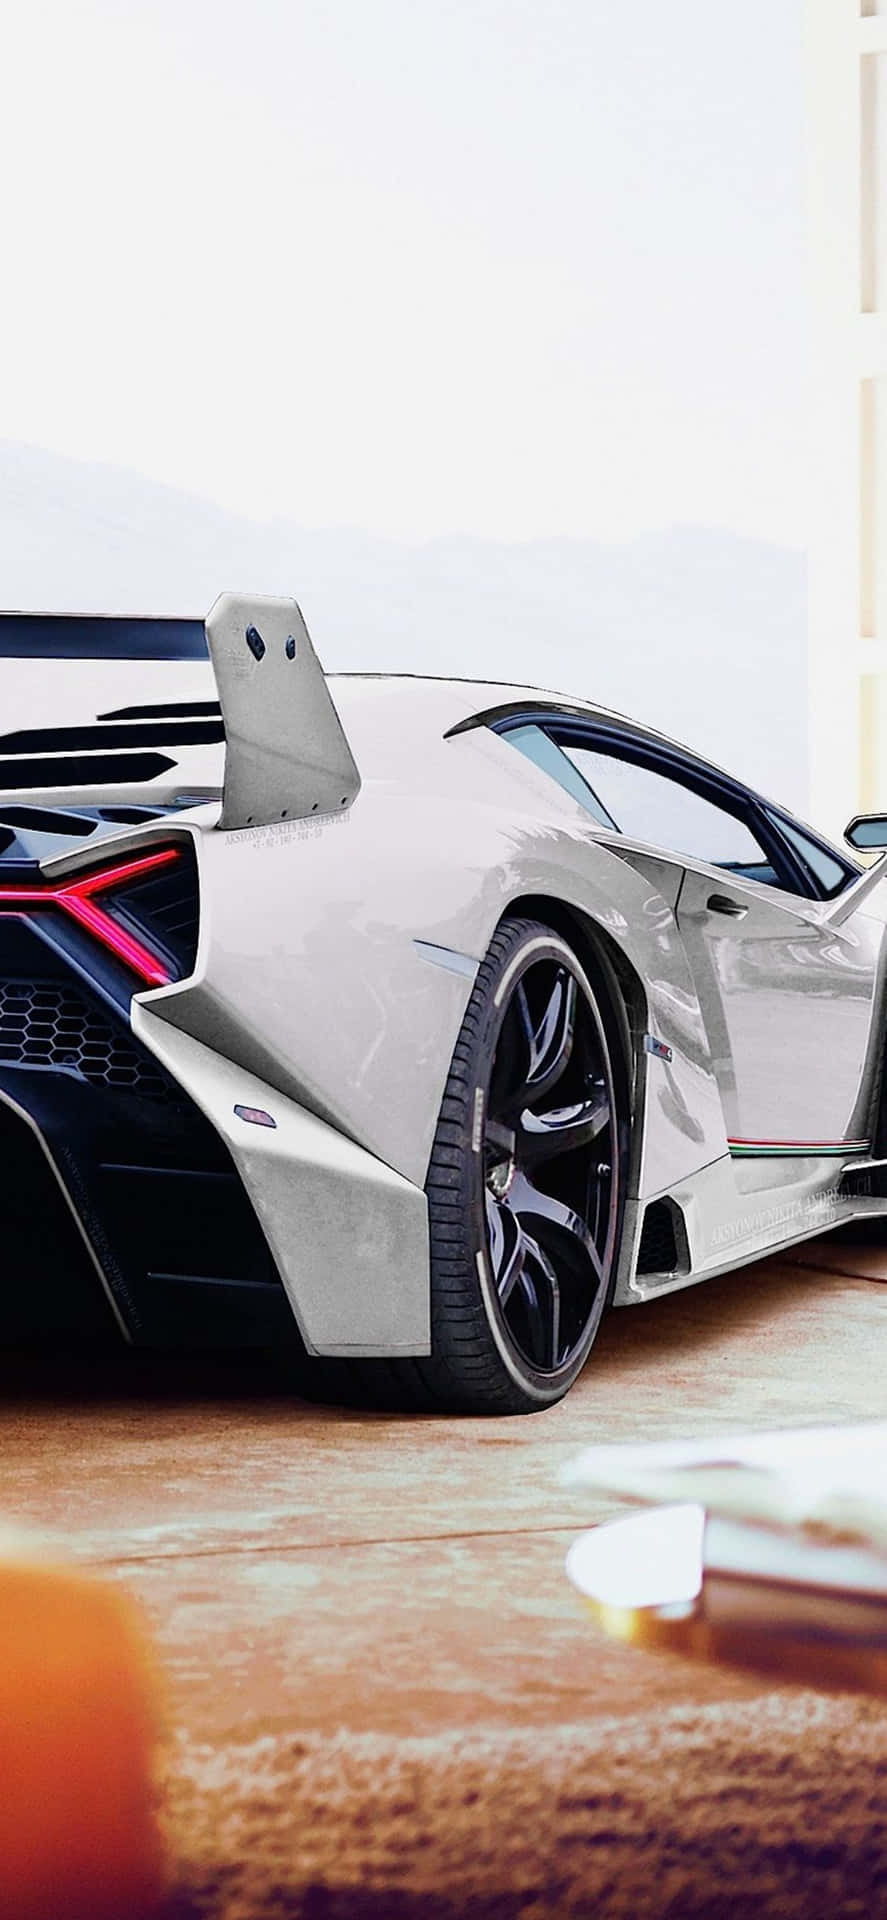 Experience luxury at its finest with the Iphone X Lamborghini